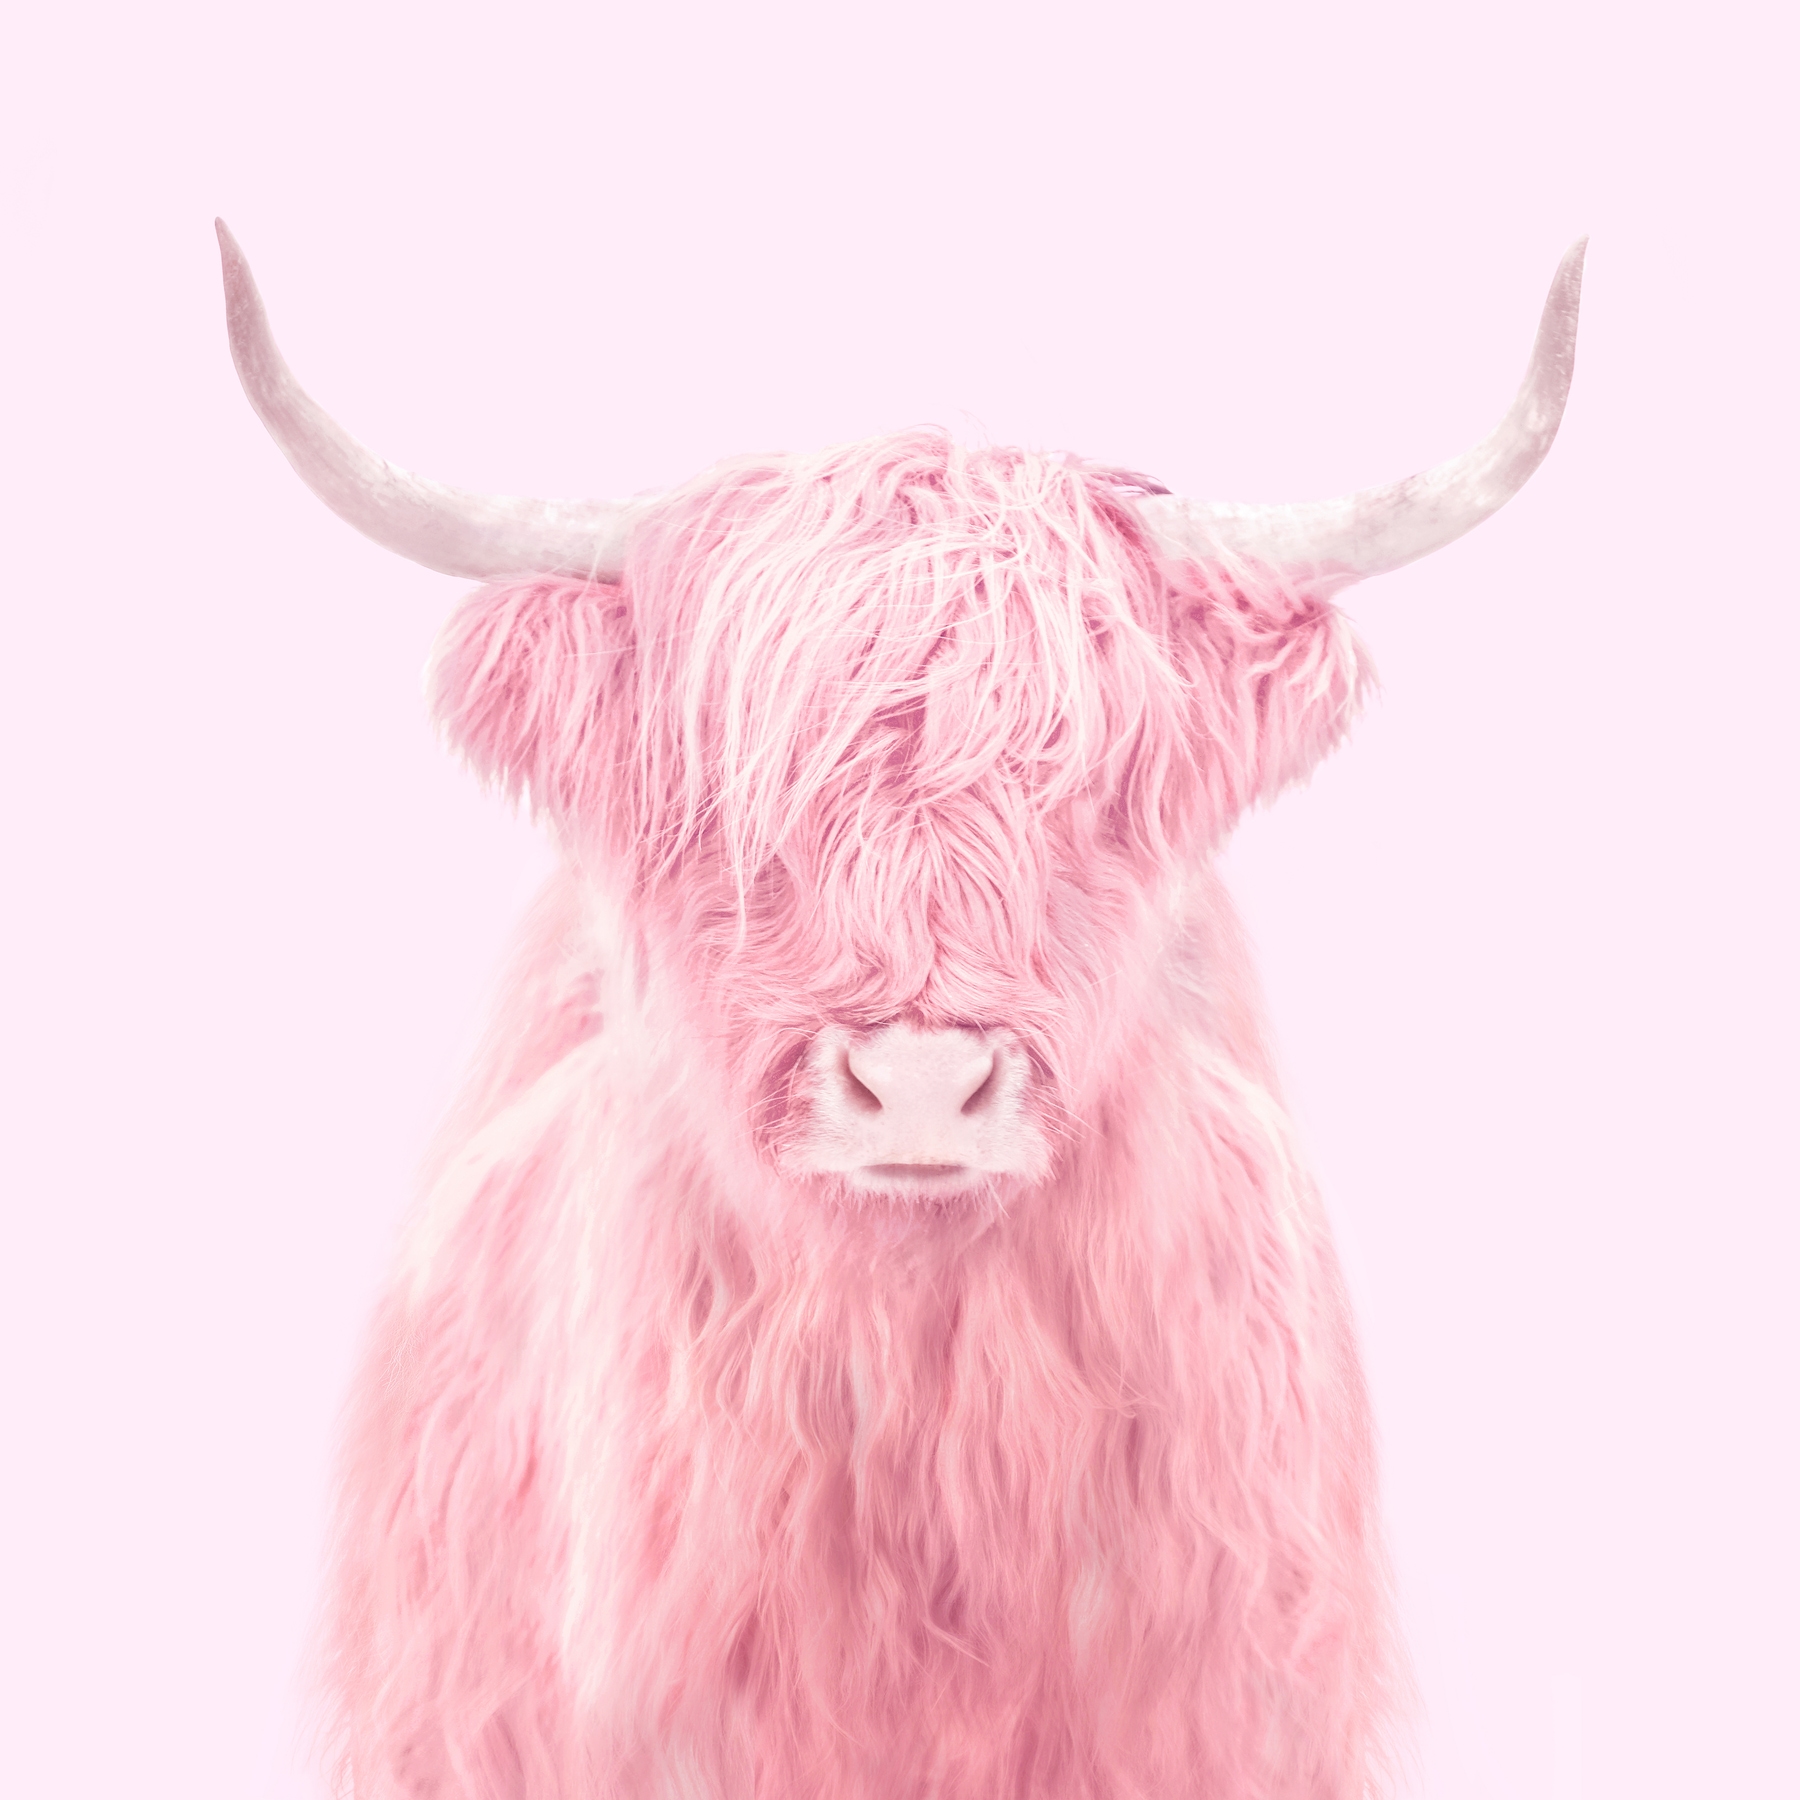 Highland Cattle Wallpapers